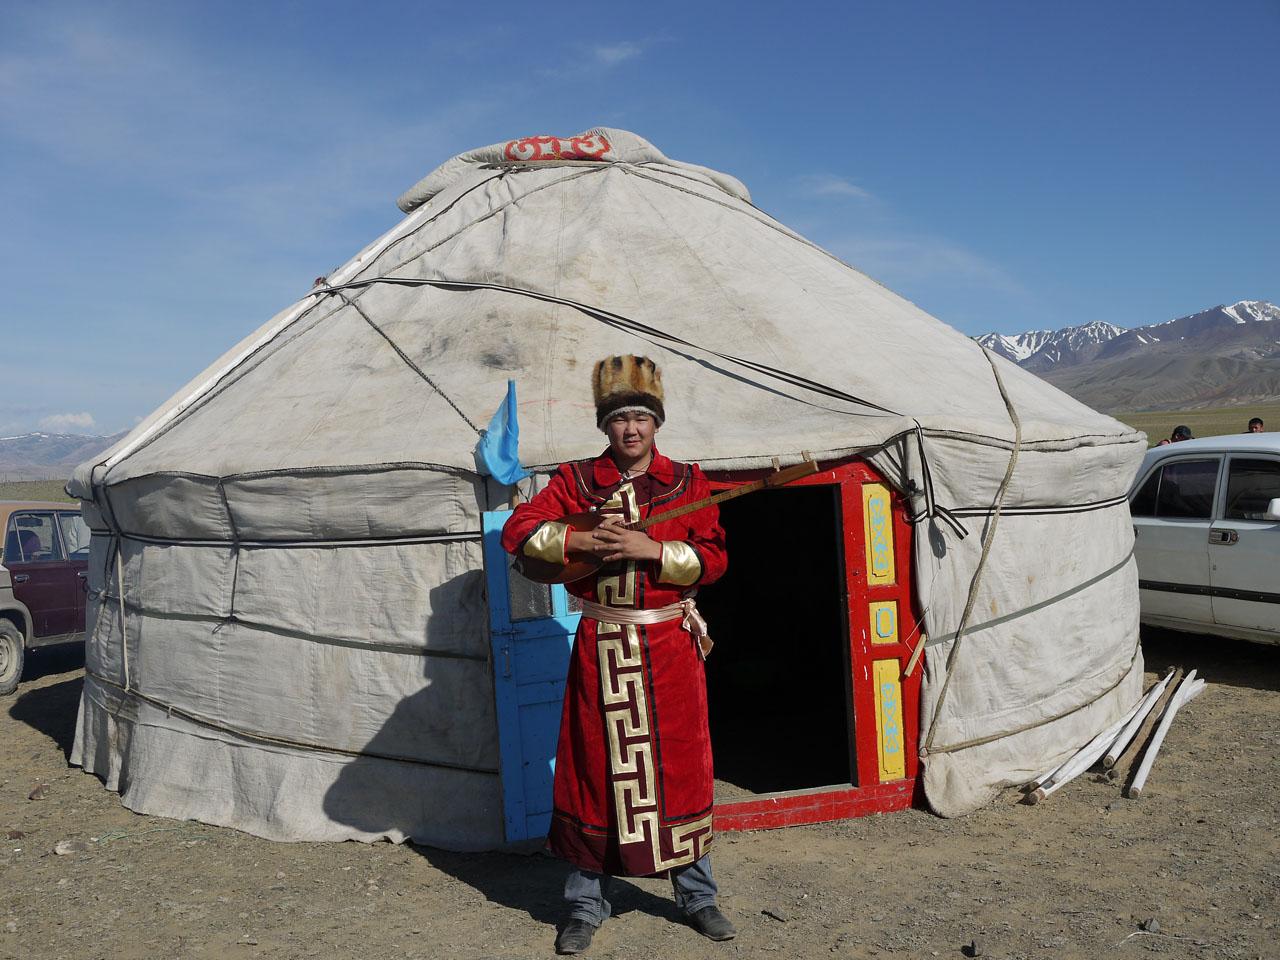 Russia/China: Pipeline Threatens Sacred Highlands